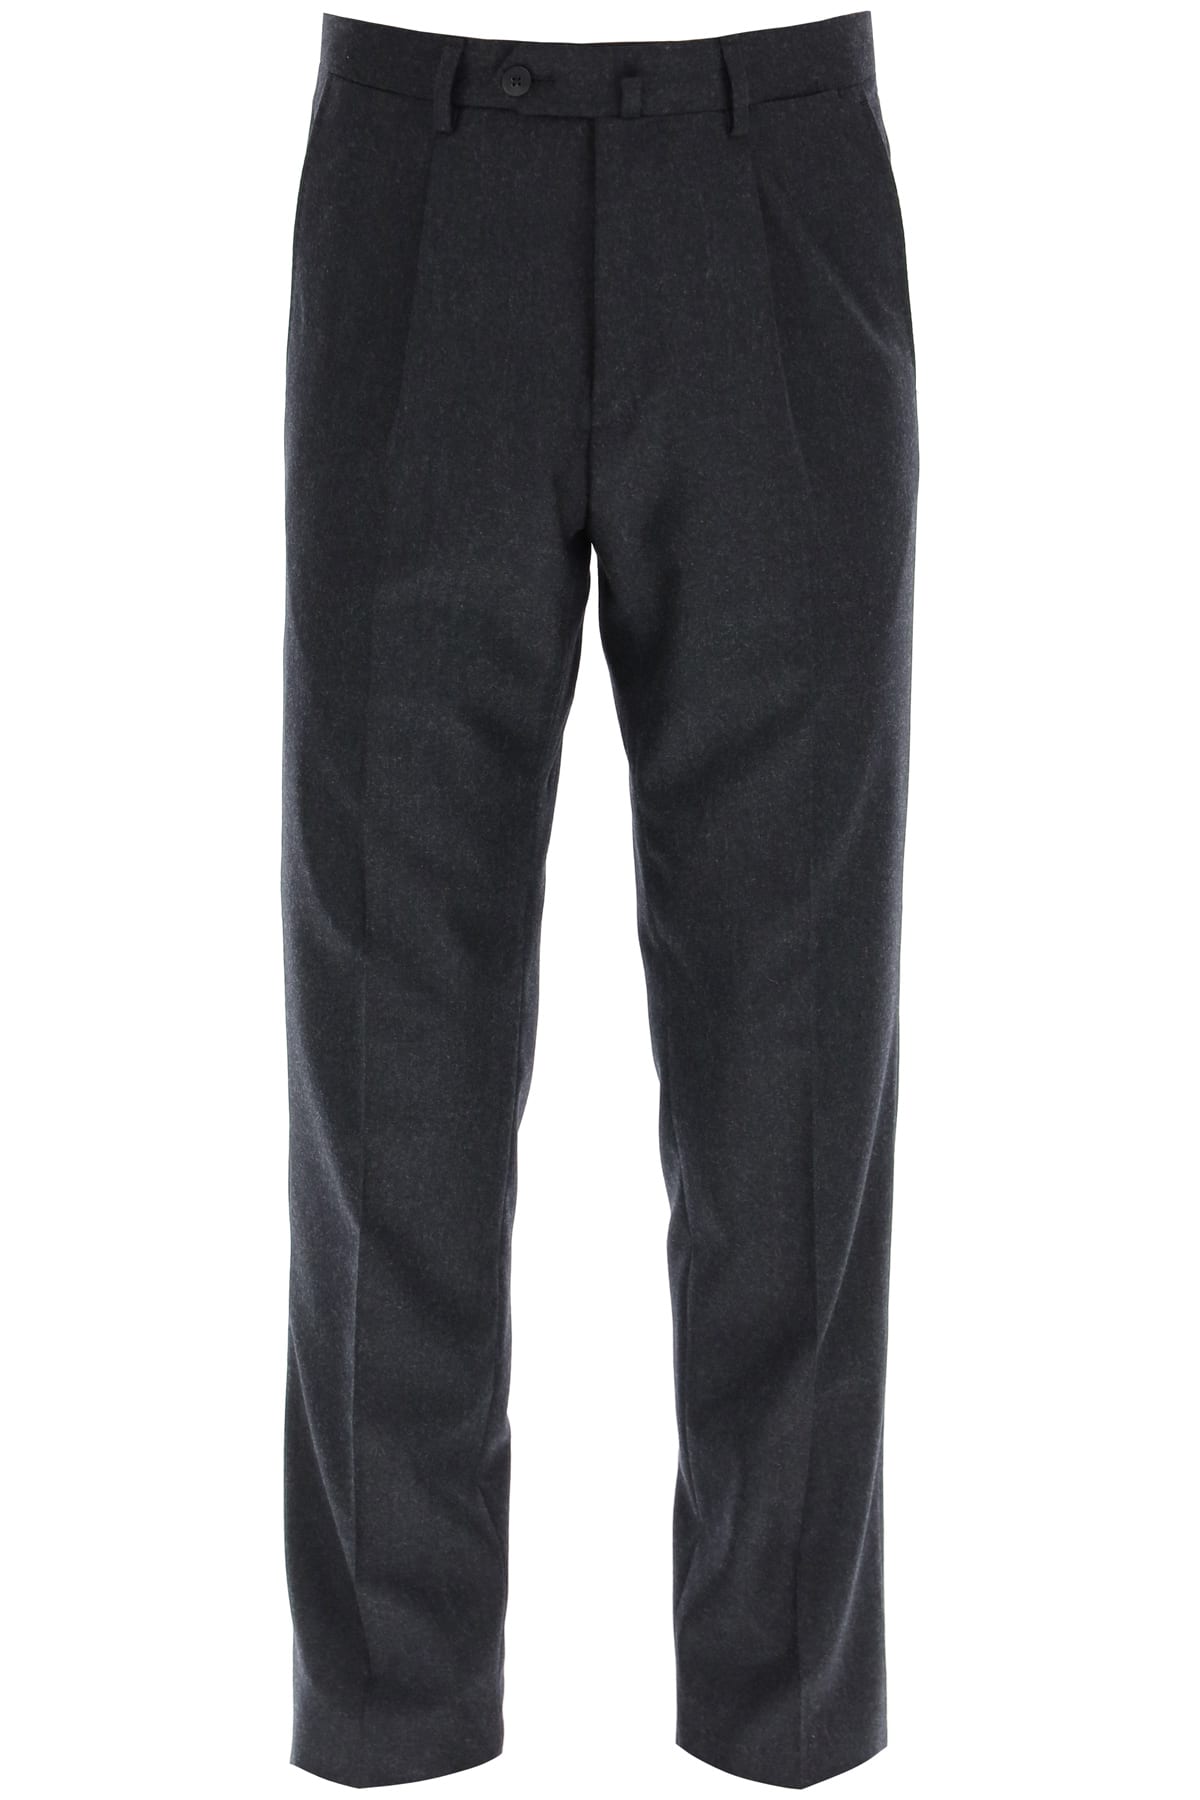 Caruso Superfine Wool Trousers